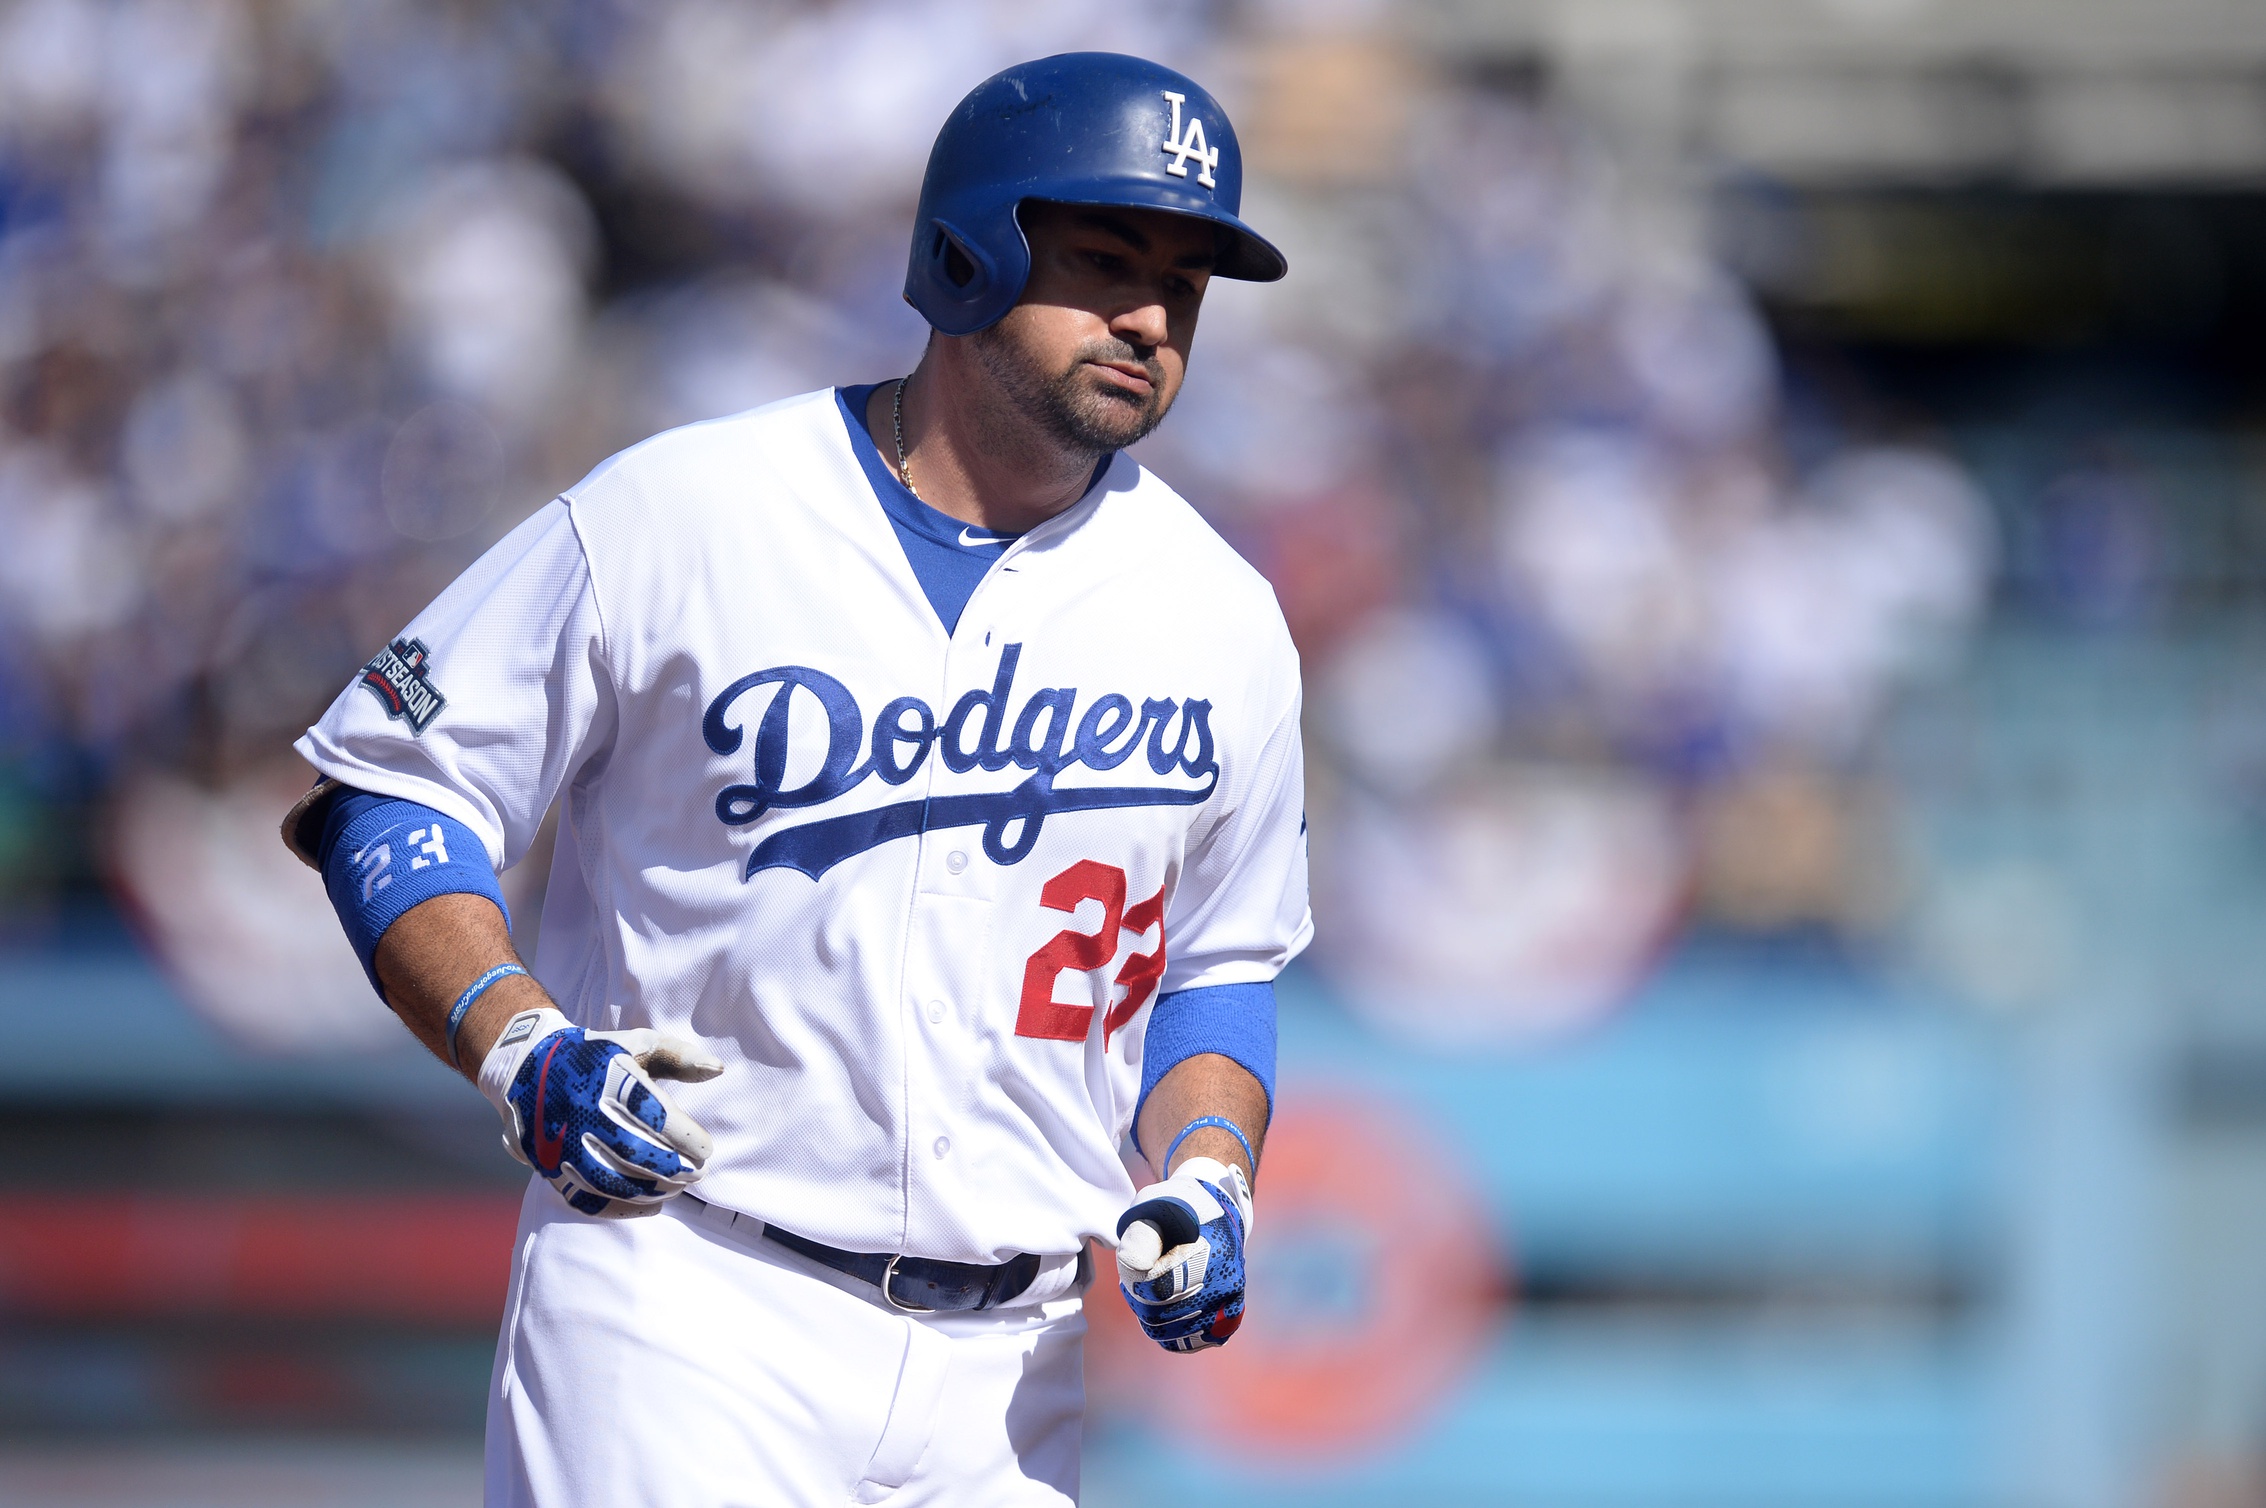 Dodgers Legend Adrian Gonzalez Partners With Jim Beam For Ultimate Giveaway  Experience